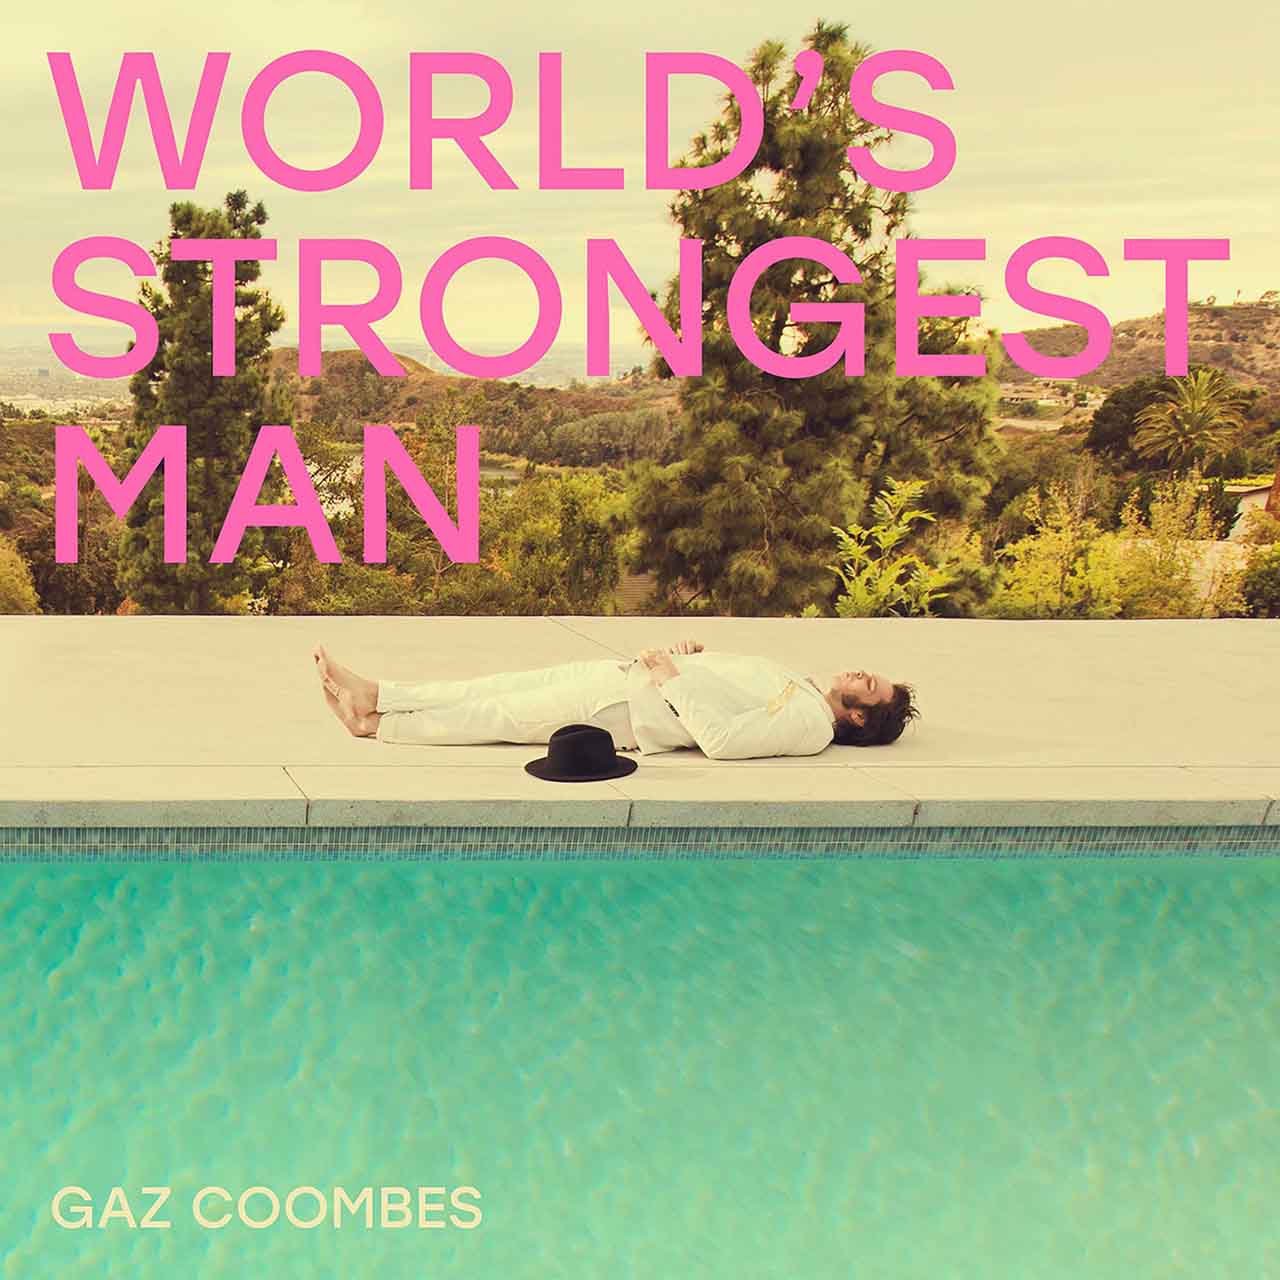 ‘World’s Strongest Man’: Gaz Coombes Flexes His Creative Muscles